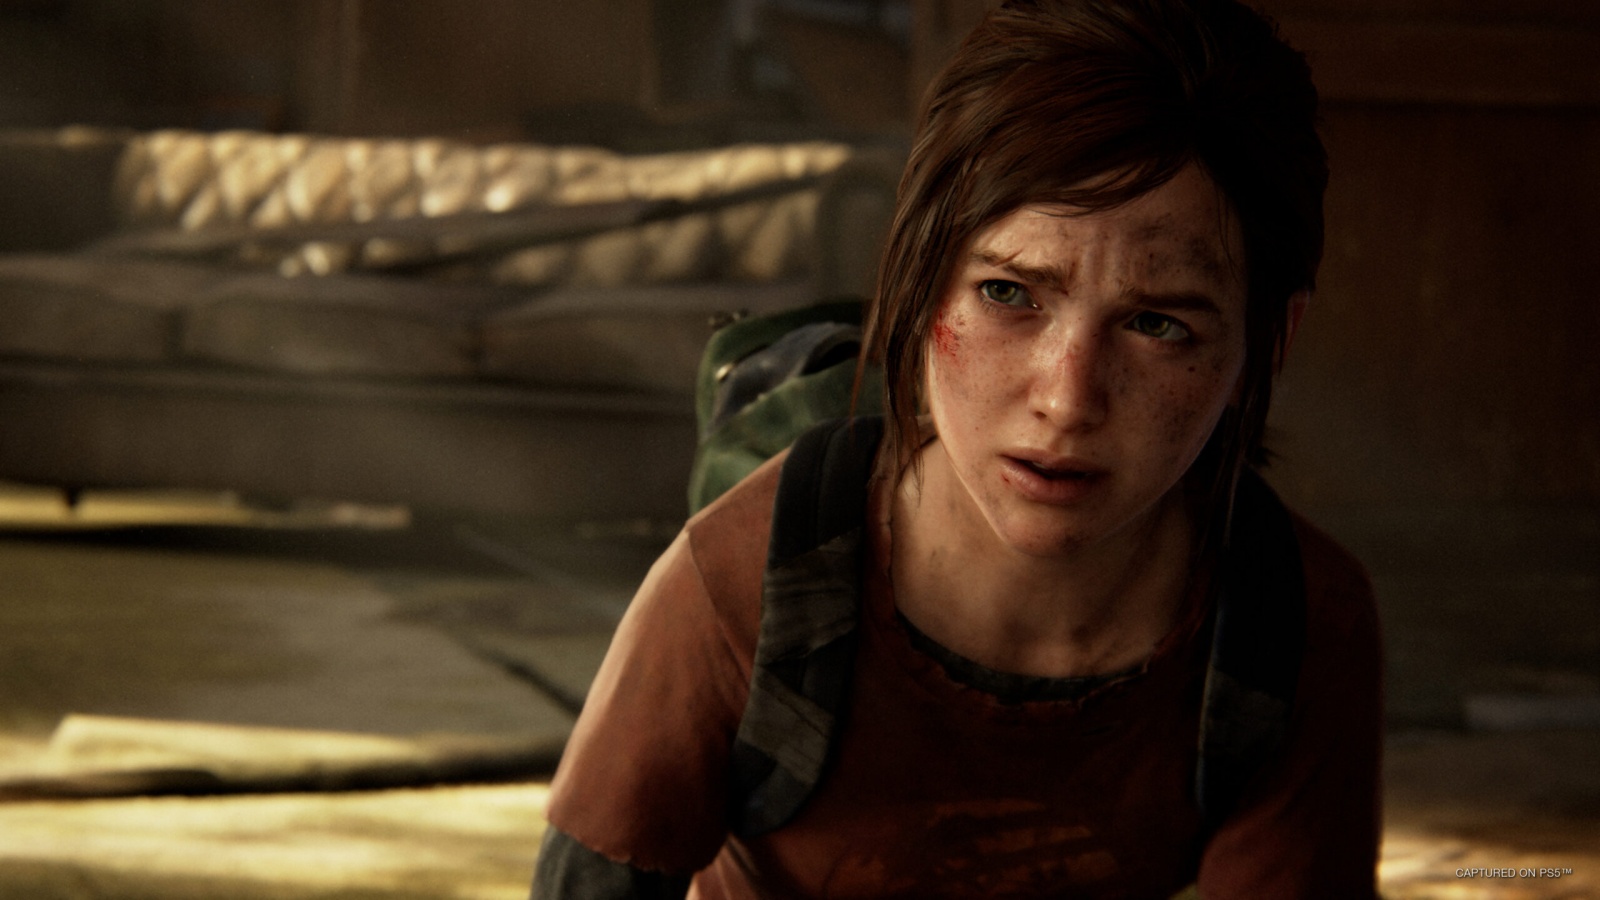 The Last of Us loses Steam Deck stamp of approval after buggy PC